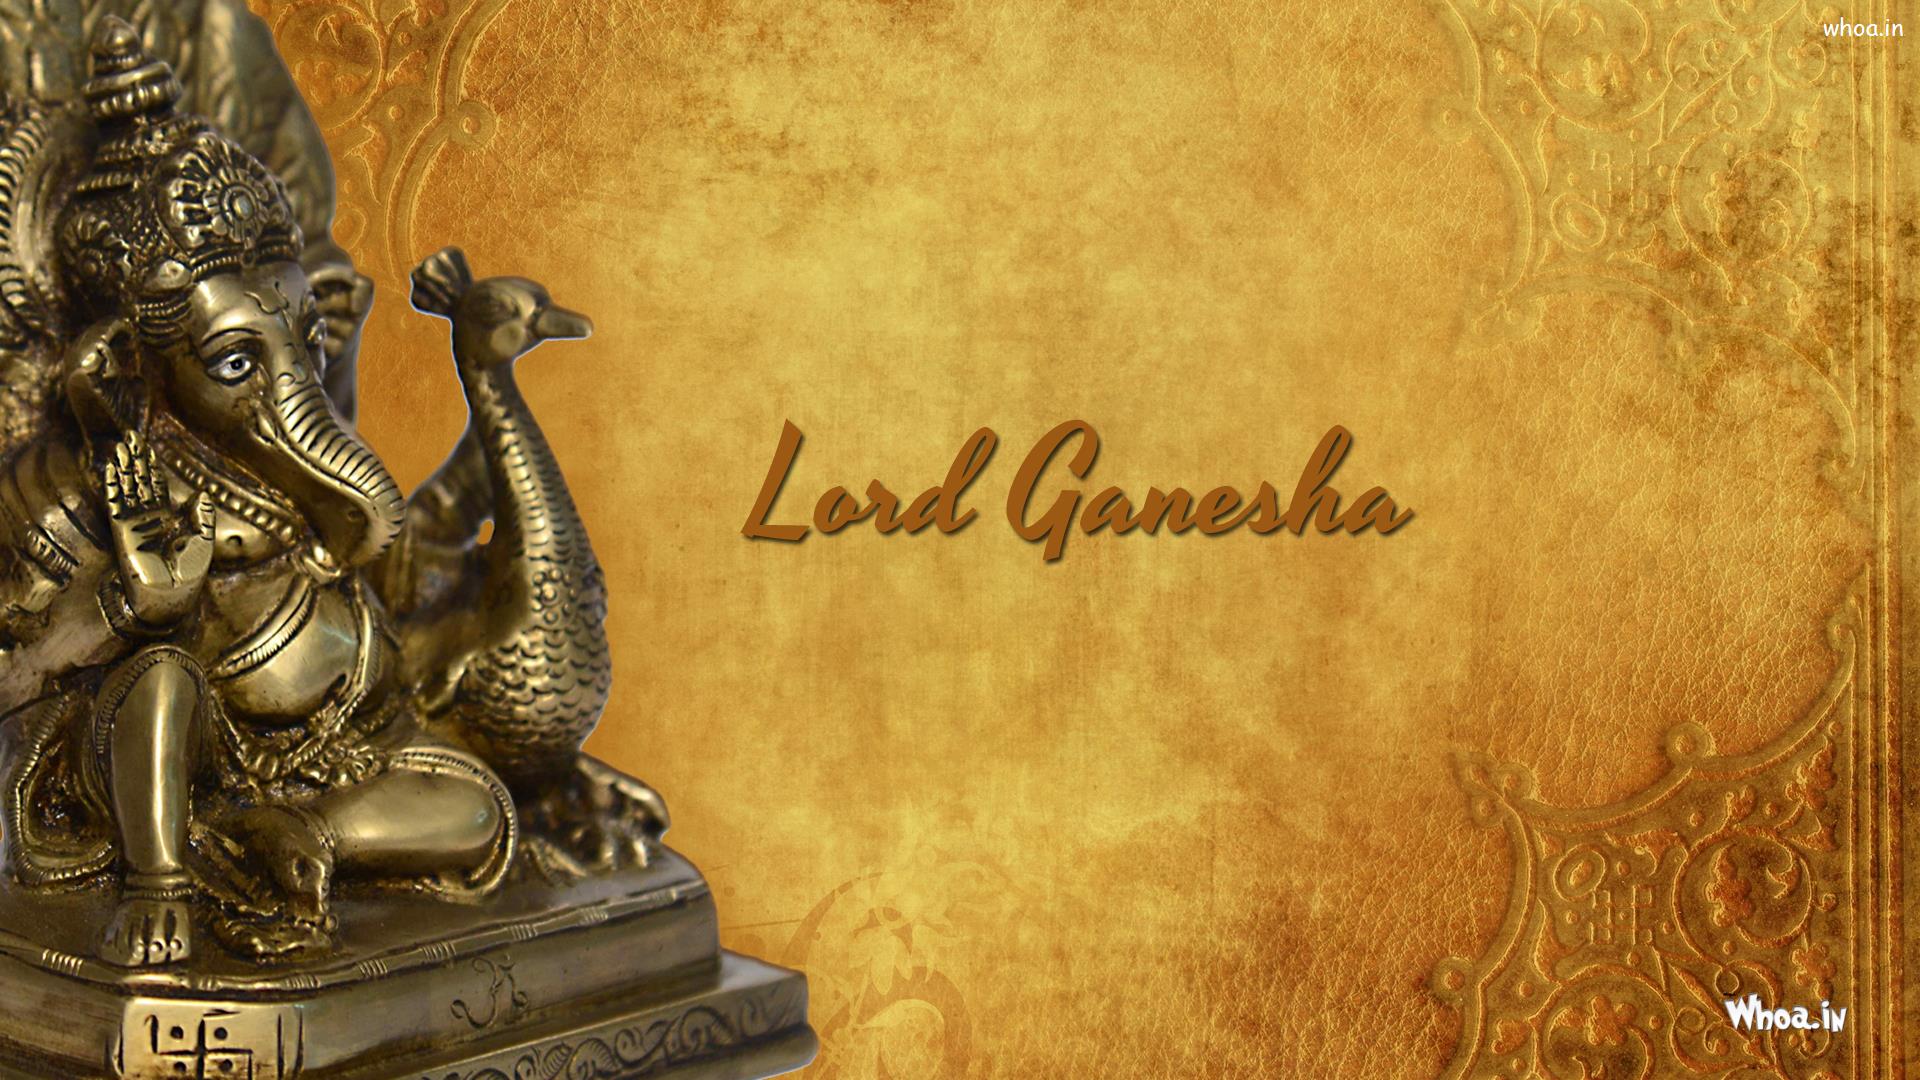 Lord Ganesha Statue With Yellow Background HD Wallpaper